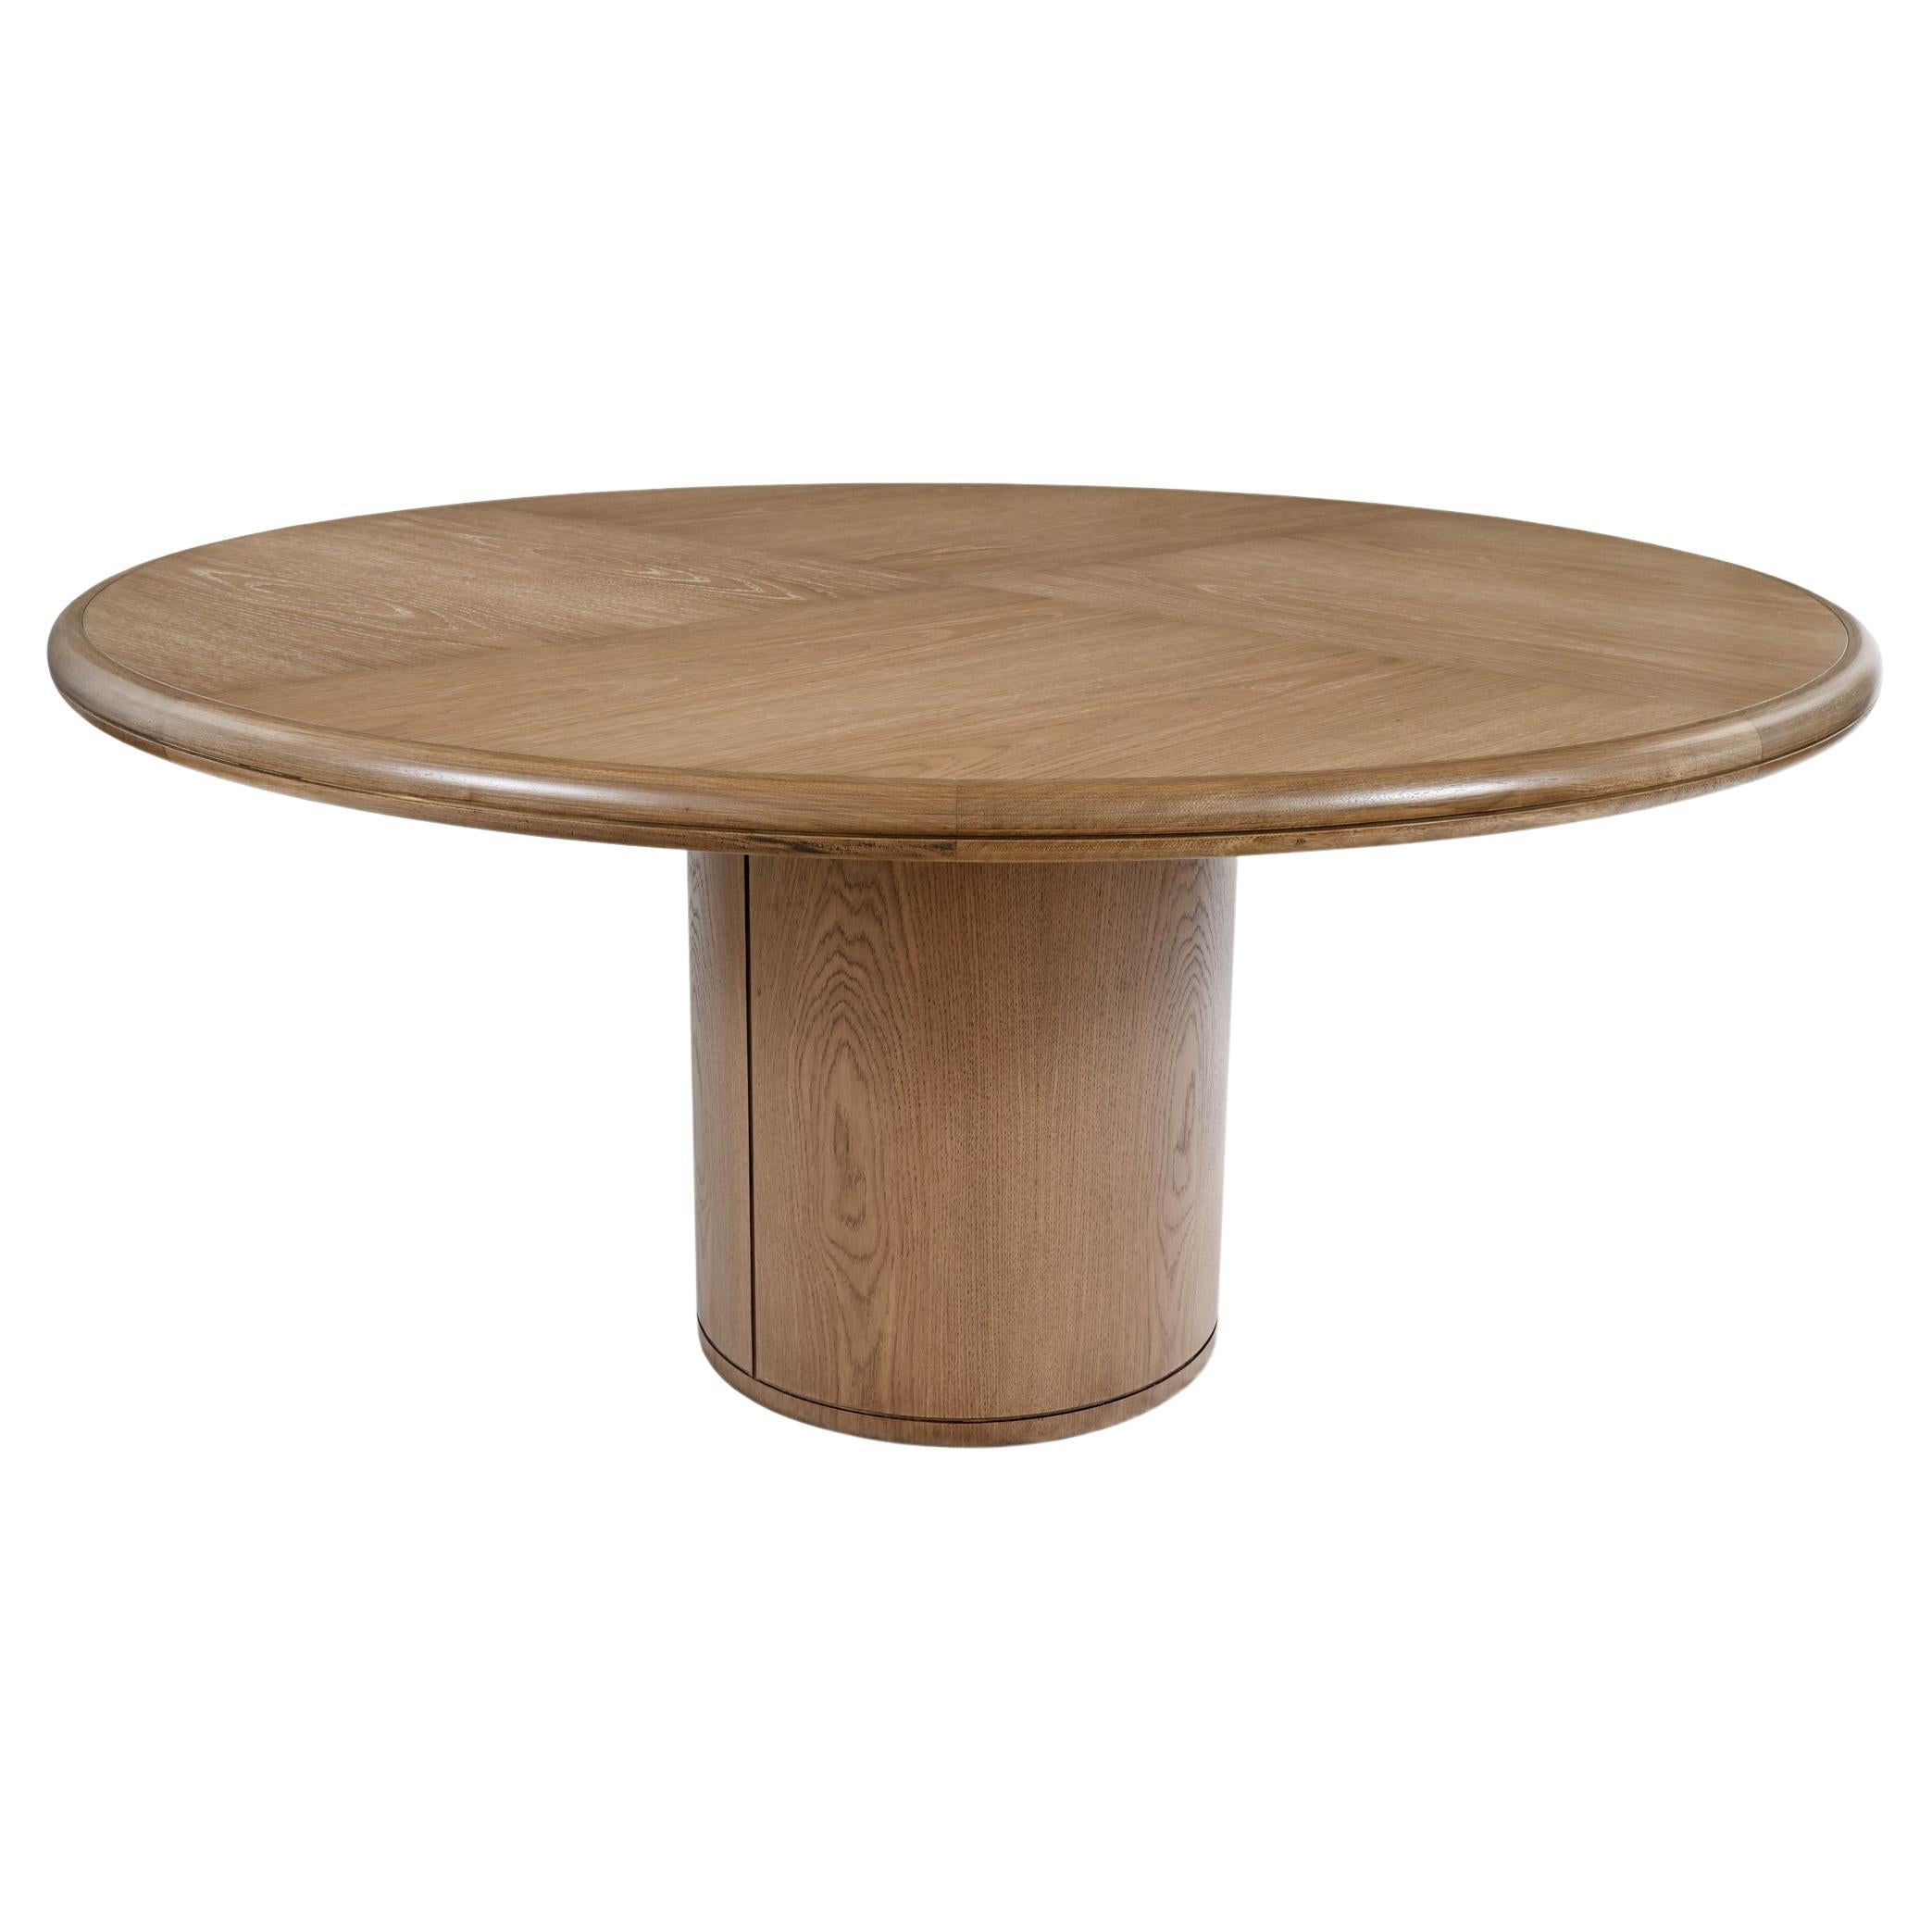 Modern, 21st Century, Oak, Wood, Round, Natural, Moon Dining Table For Sale